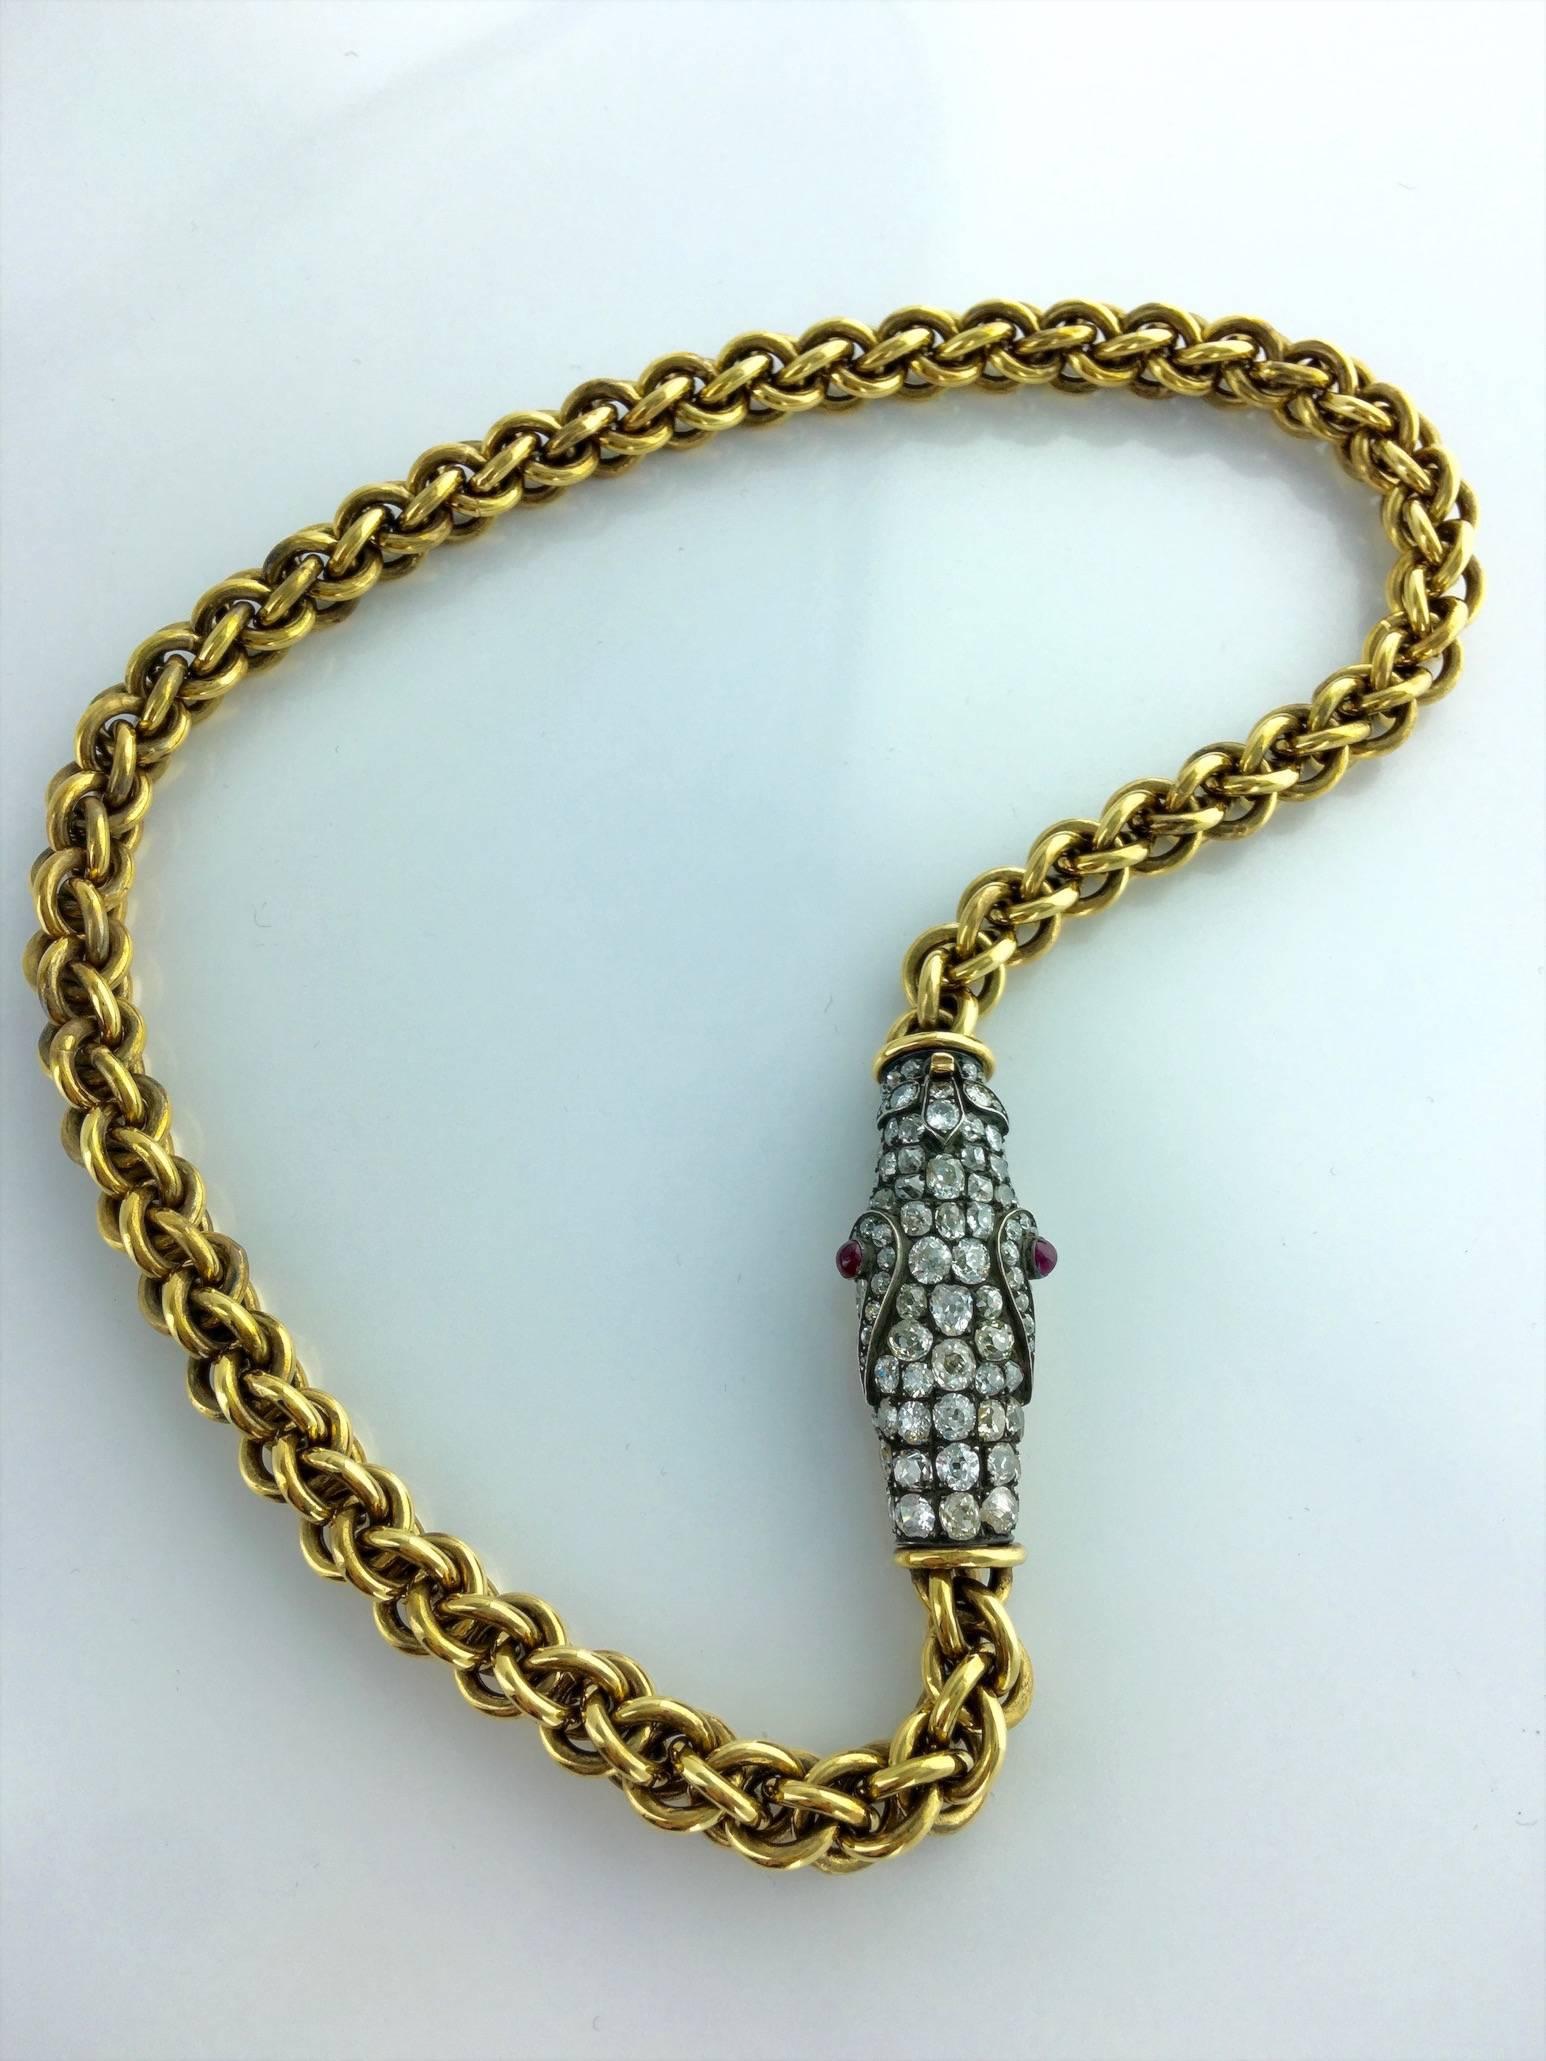 Fantastic Snake Necklace. Strong and significant, the chain is in yellow gold 18k 750 and the Snake's head is in silver and gold engraved, all pave on the top by Old-mine cut Diamond. The eyes are cabochon rubies.

Total Diamond weight: